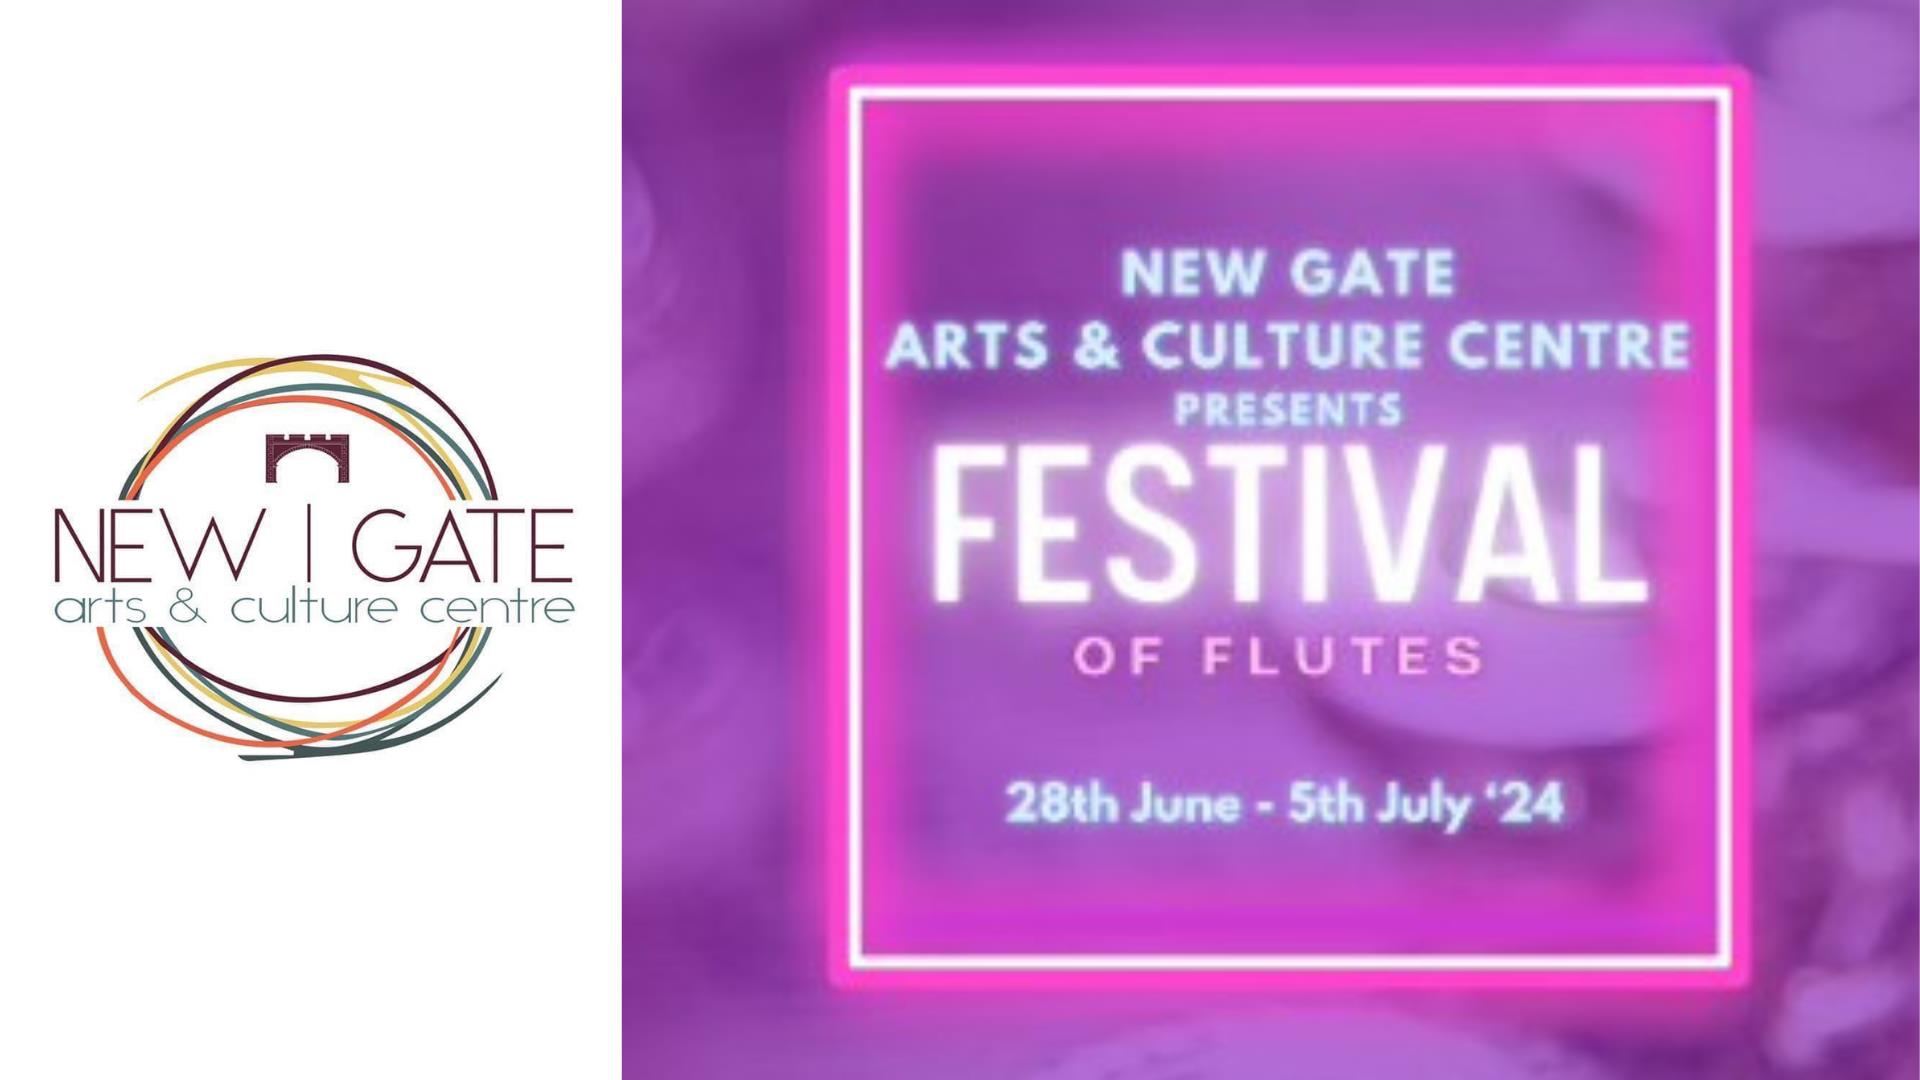 The logo for New Gate Arts & Cultural Centre beside a promotional image for the Festival of Flutes.